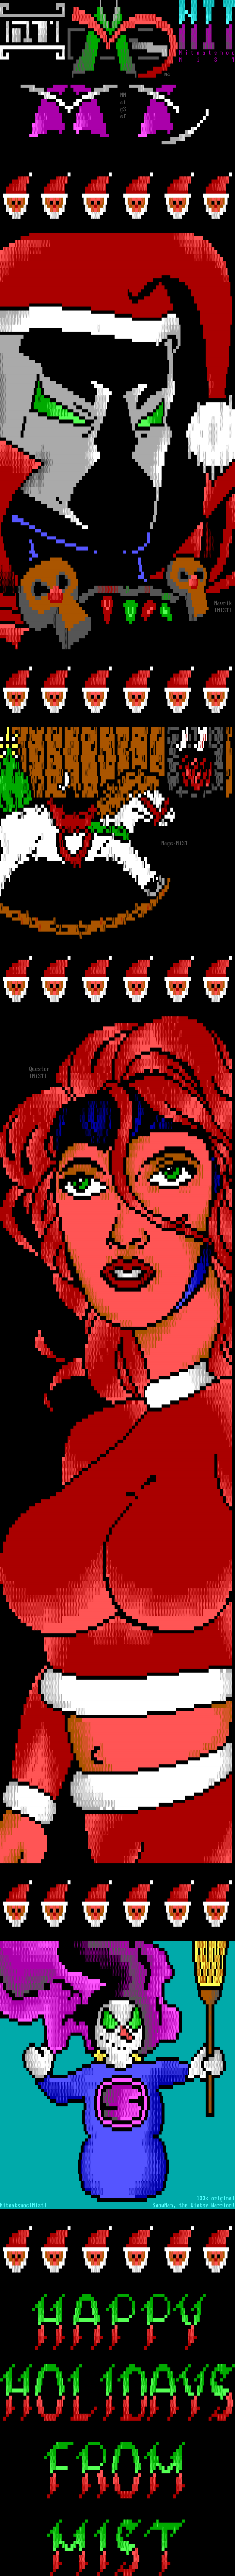 Happy Holidays from MiST ANSI! by MA, MZ, QT, Nit